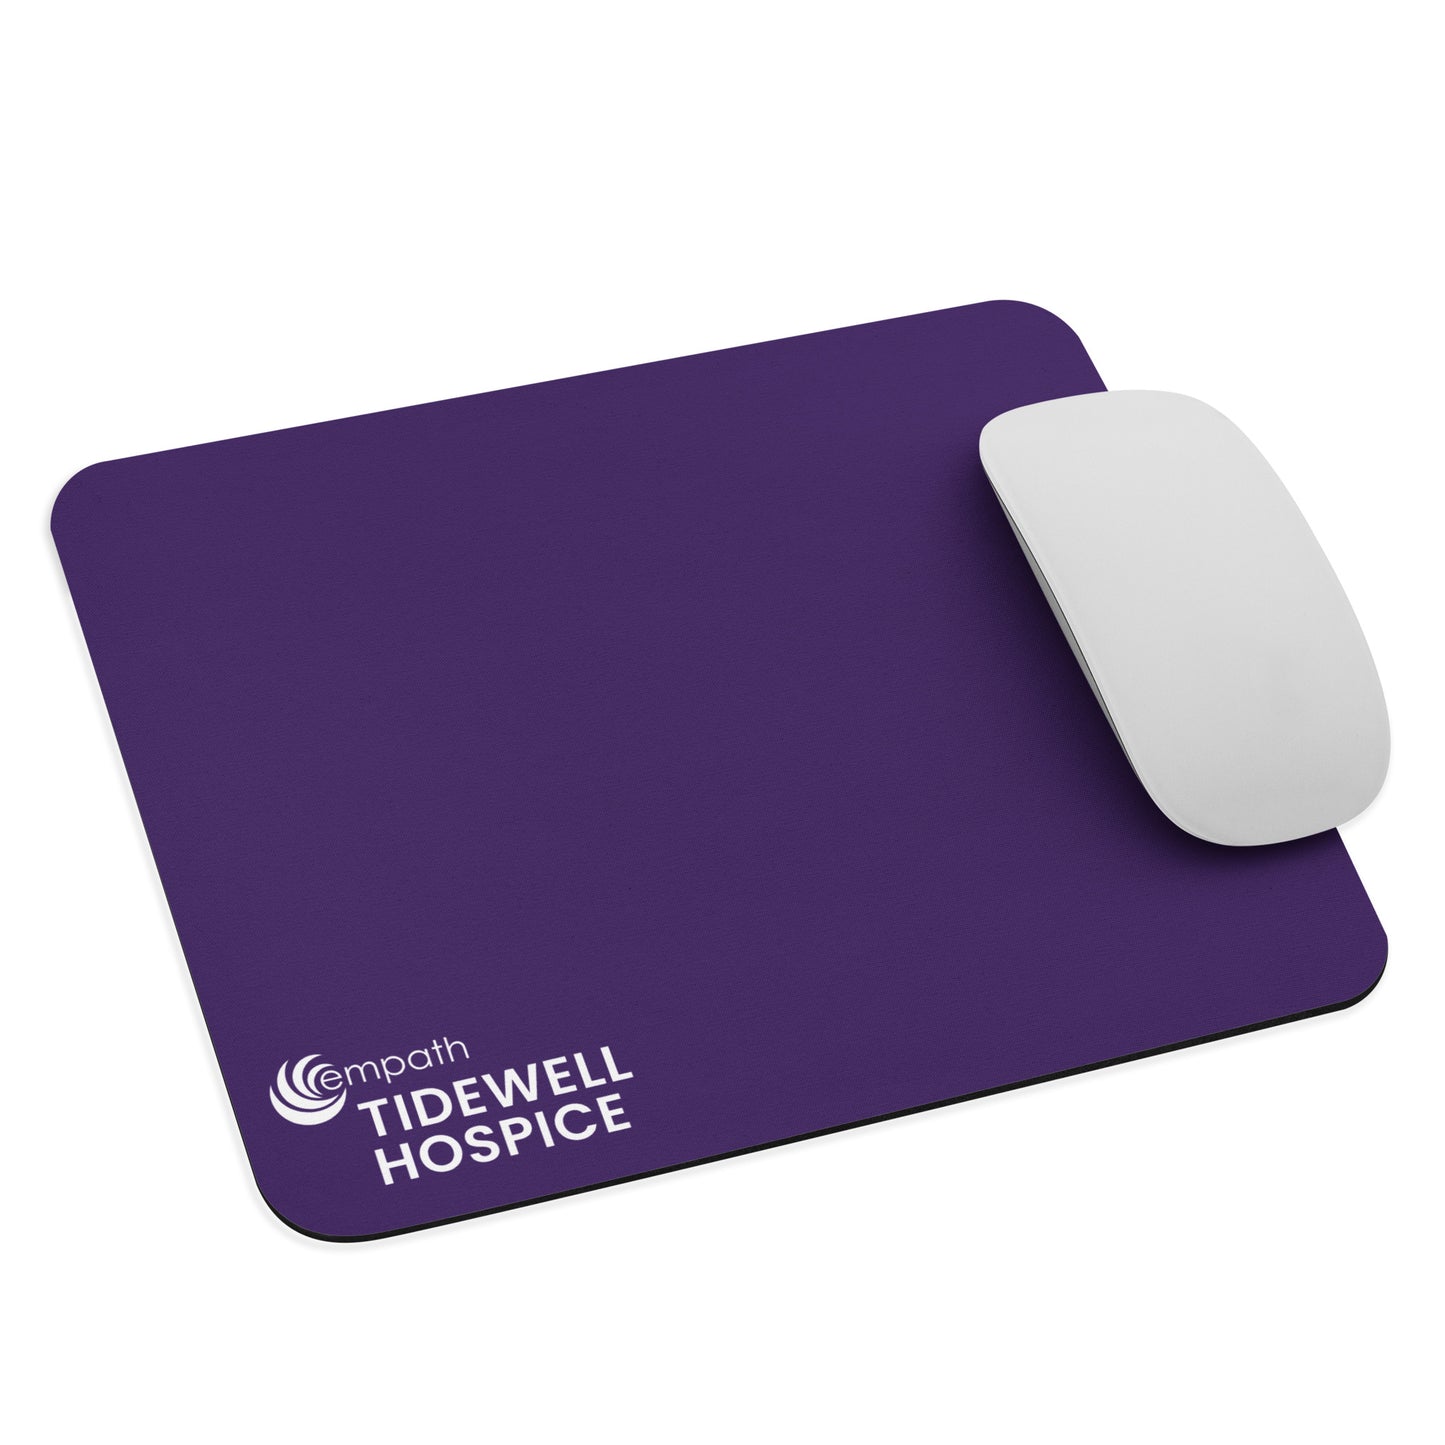 Mouse pad - Tidewell Hospice